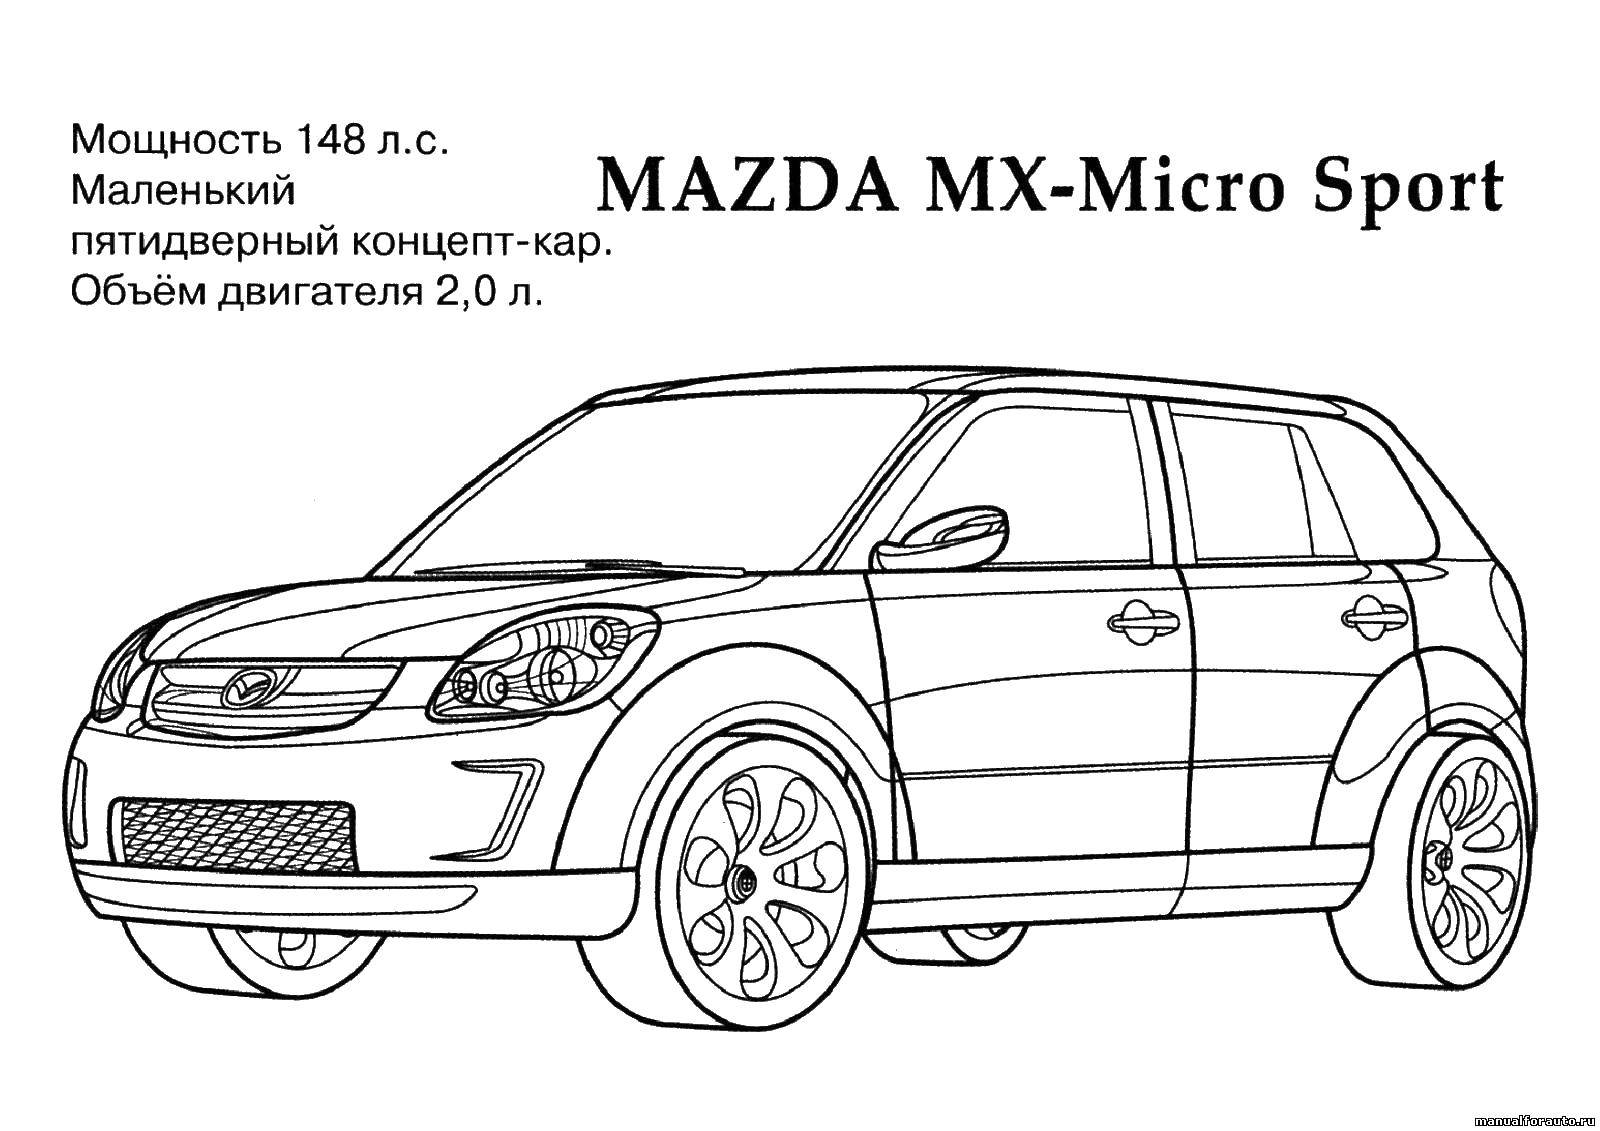 Coloring Mazda micro sport. Category coloring. Tags:  Transport, car.